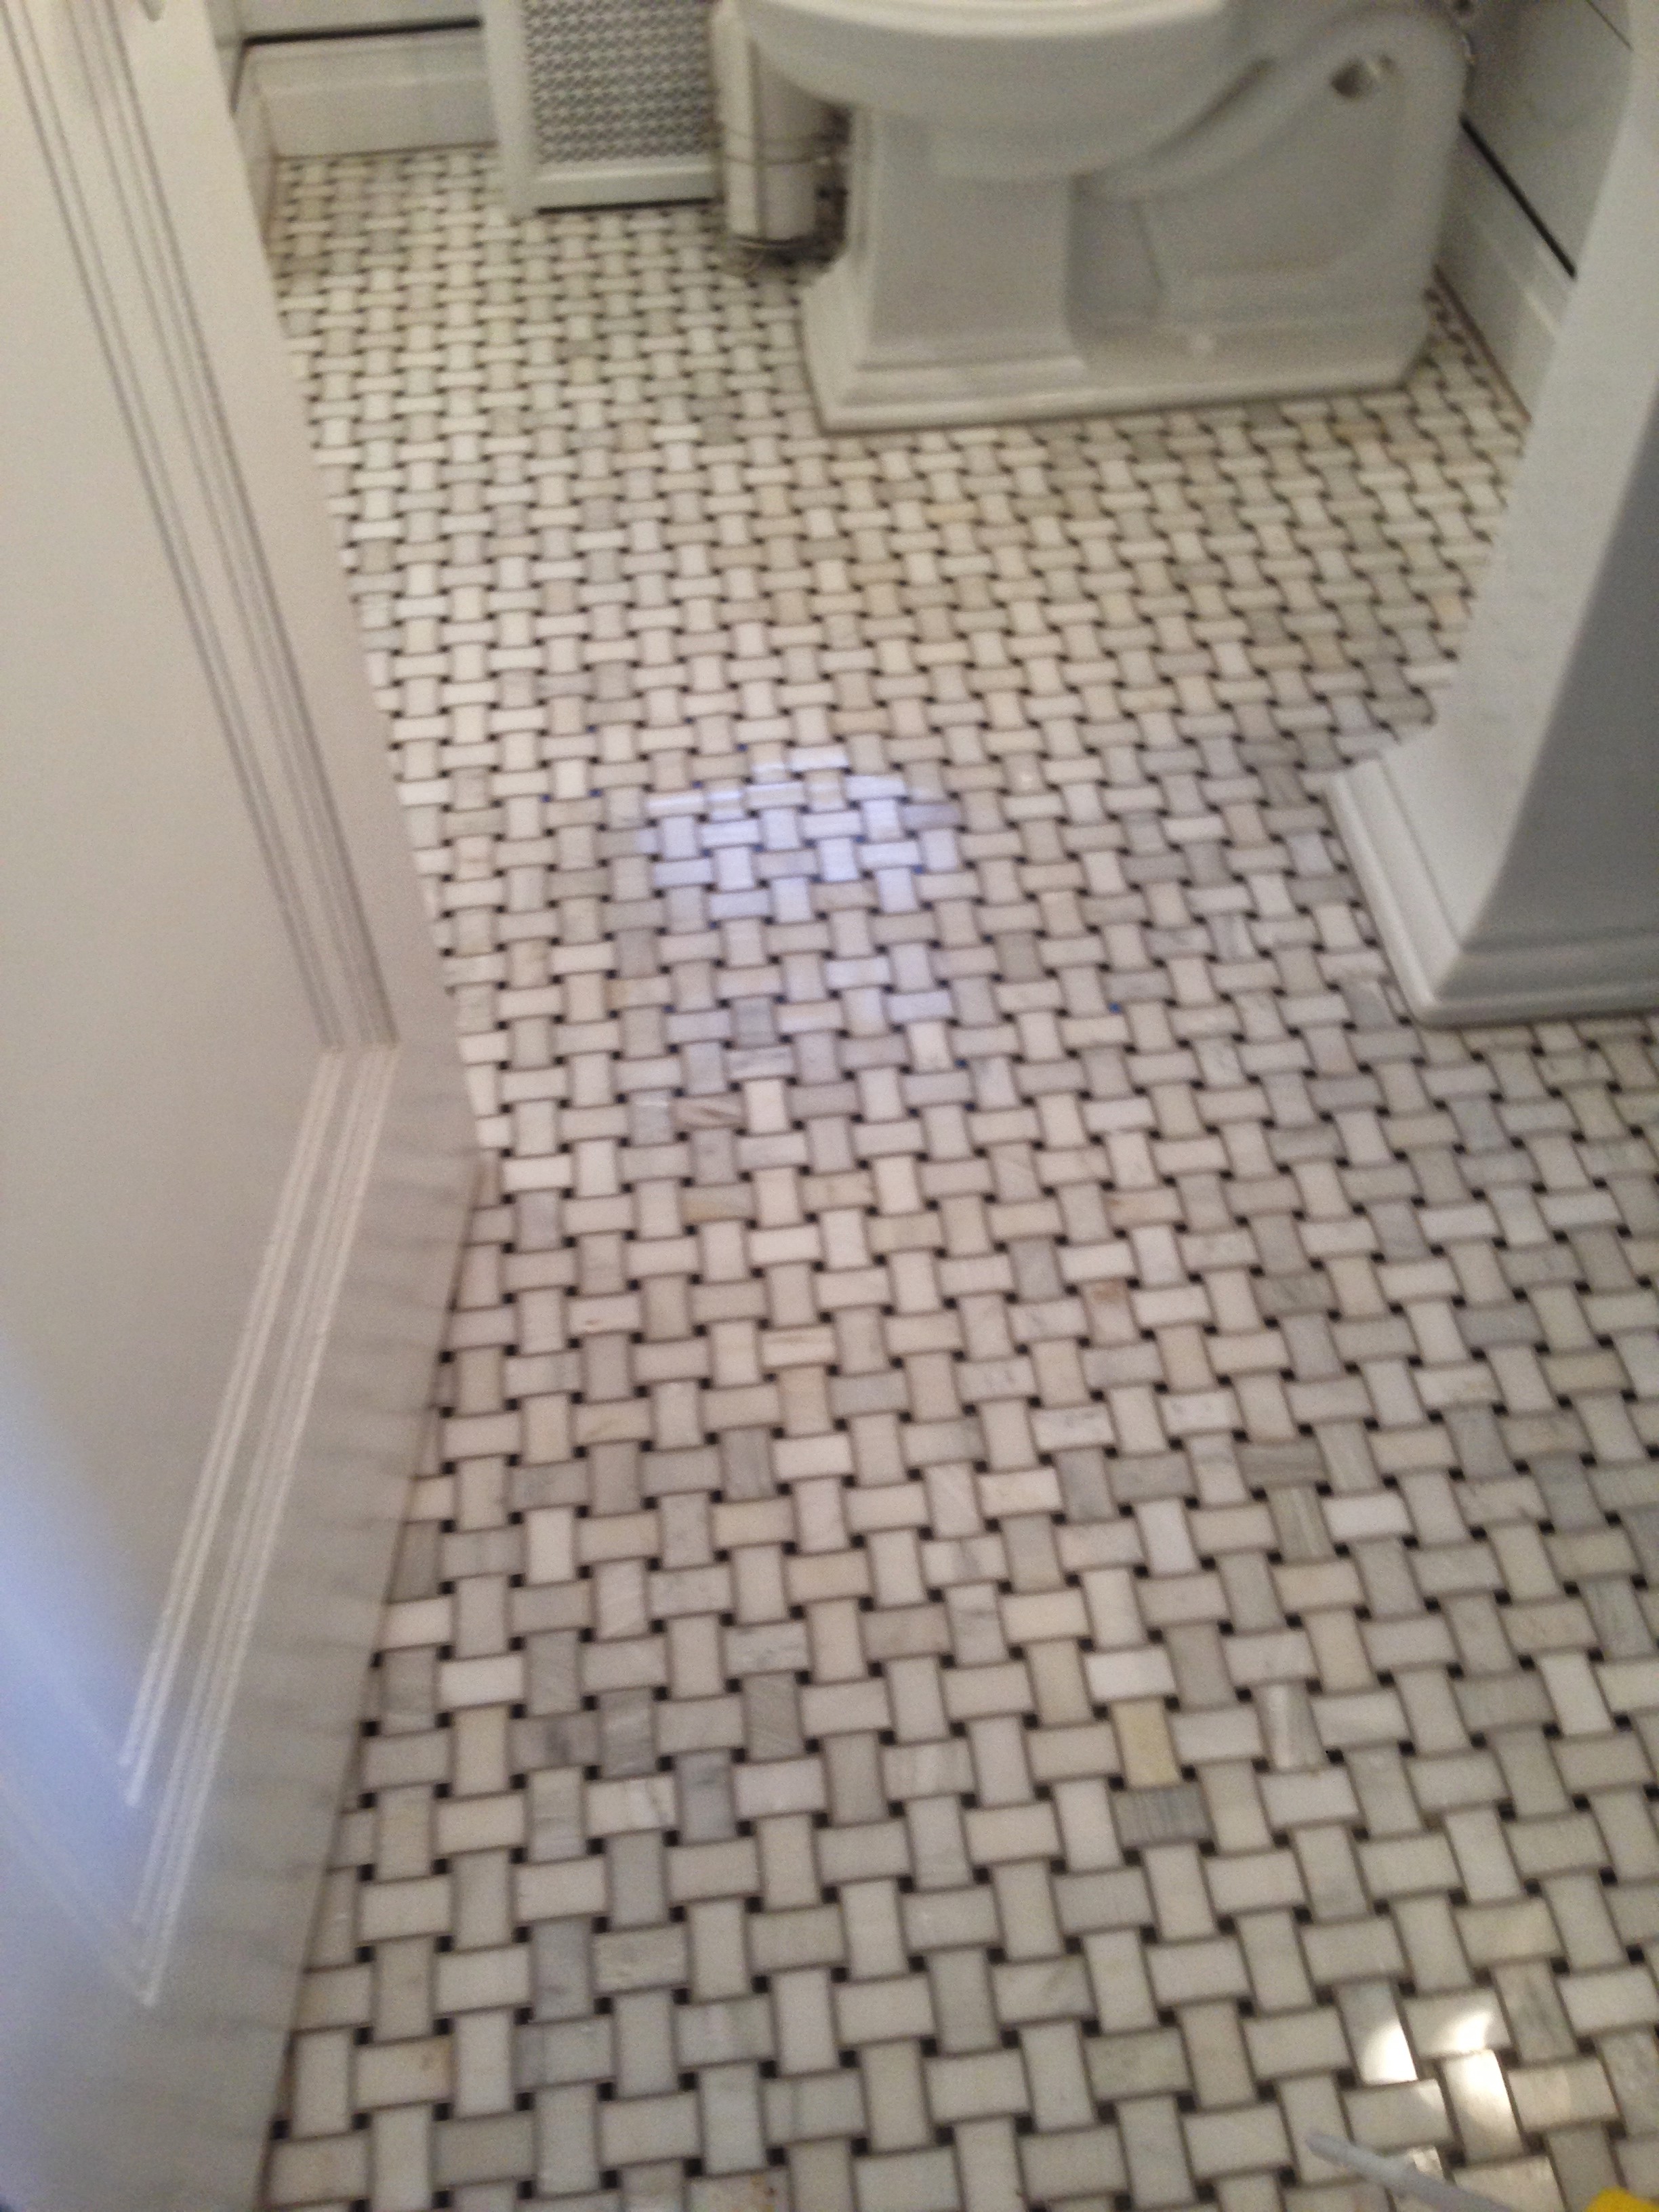 Bathroom Remodeling, How To Remove And Retile Bathroom Floor